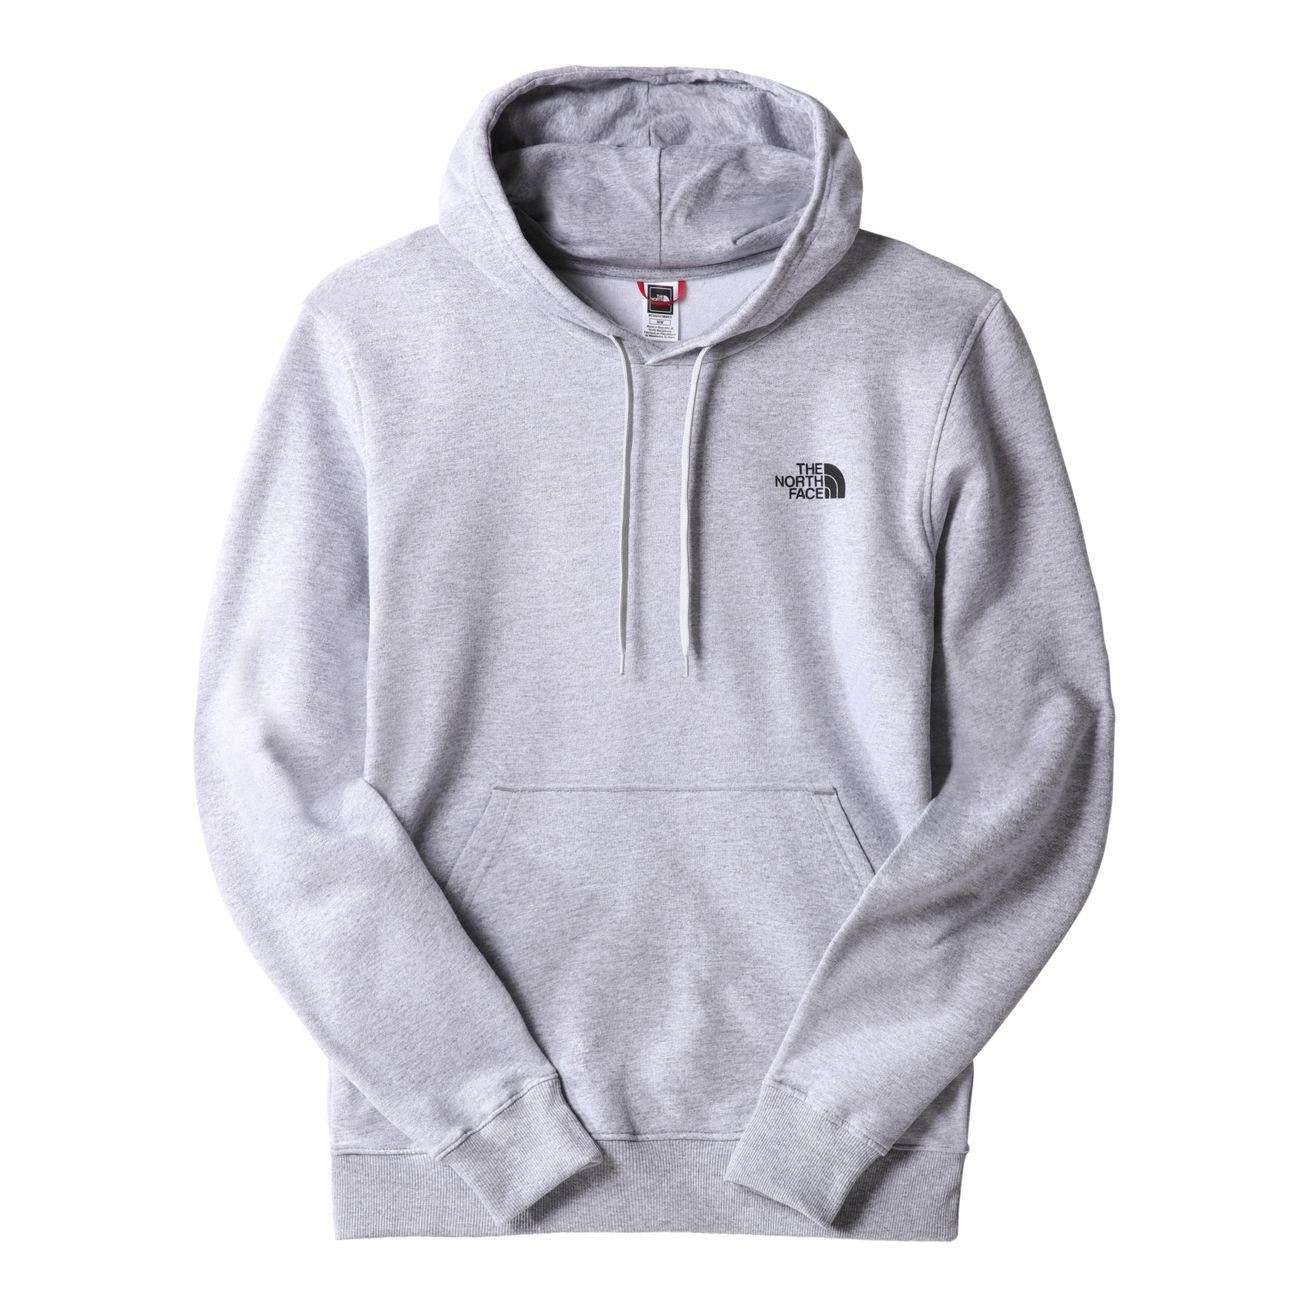 THE NORTH FACE M SIMPLE DOME HOODIE Herren Kapuzenpullover - The North Face - SAGATOO - 196248033860